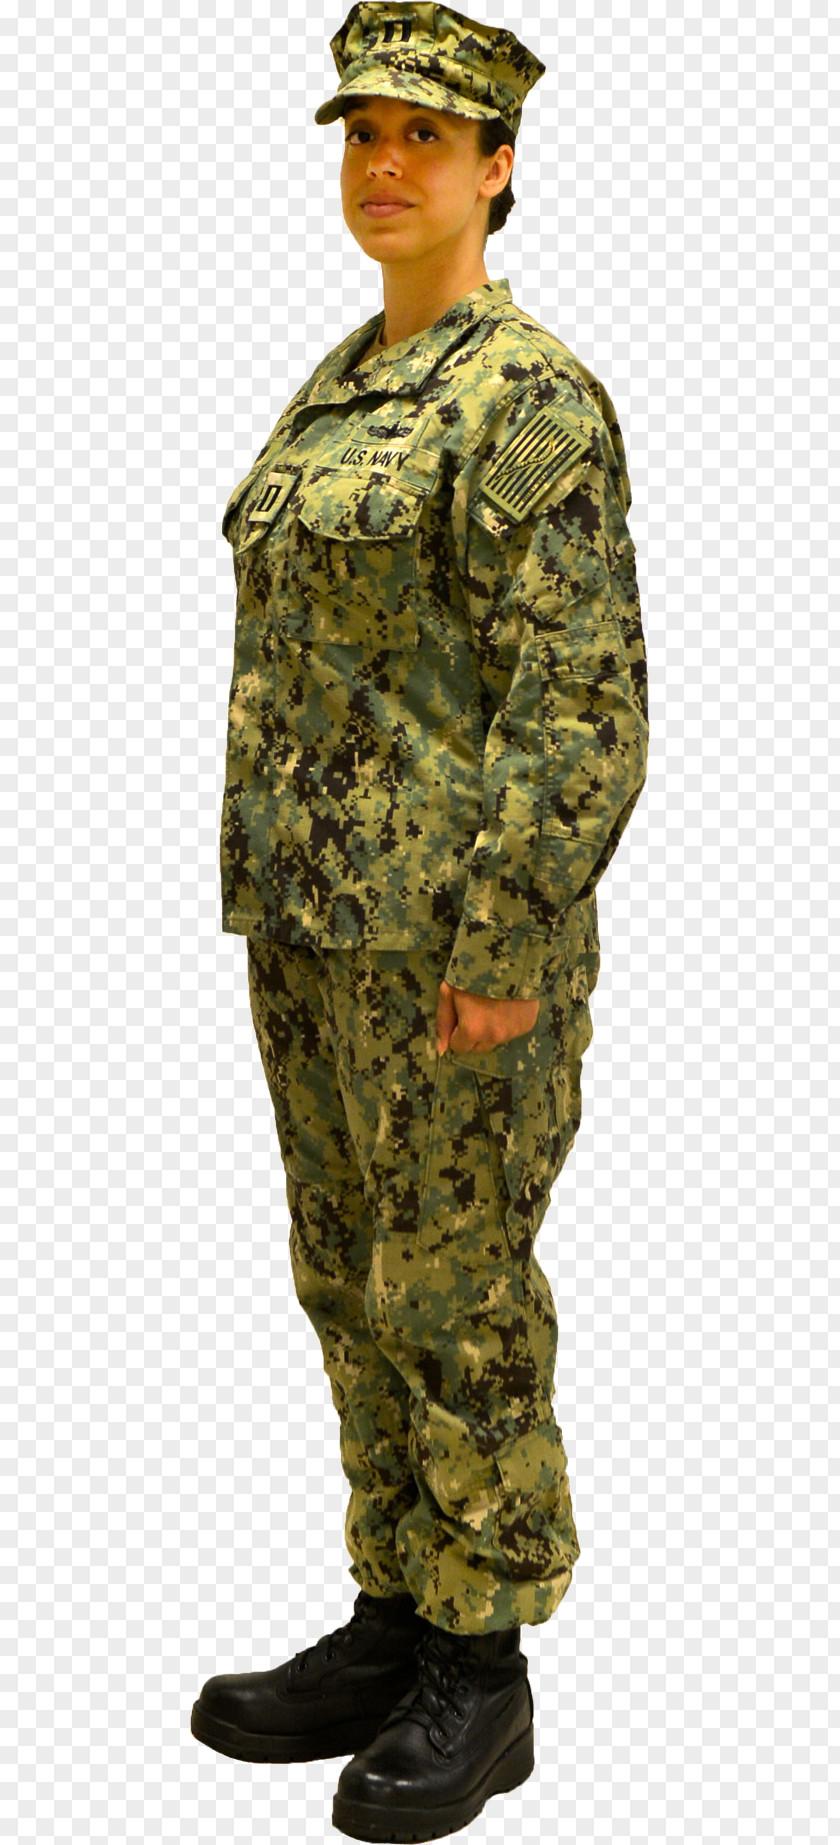 Navy Uniform United States Military Camouflage Sailor PNG